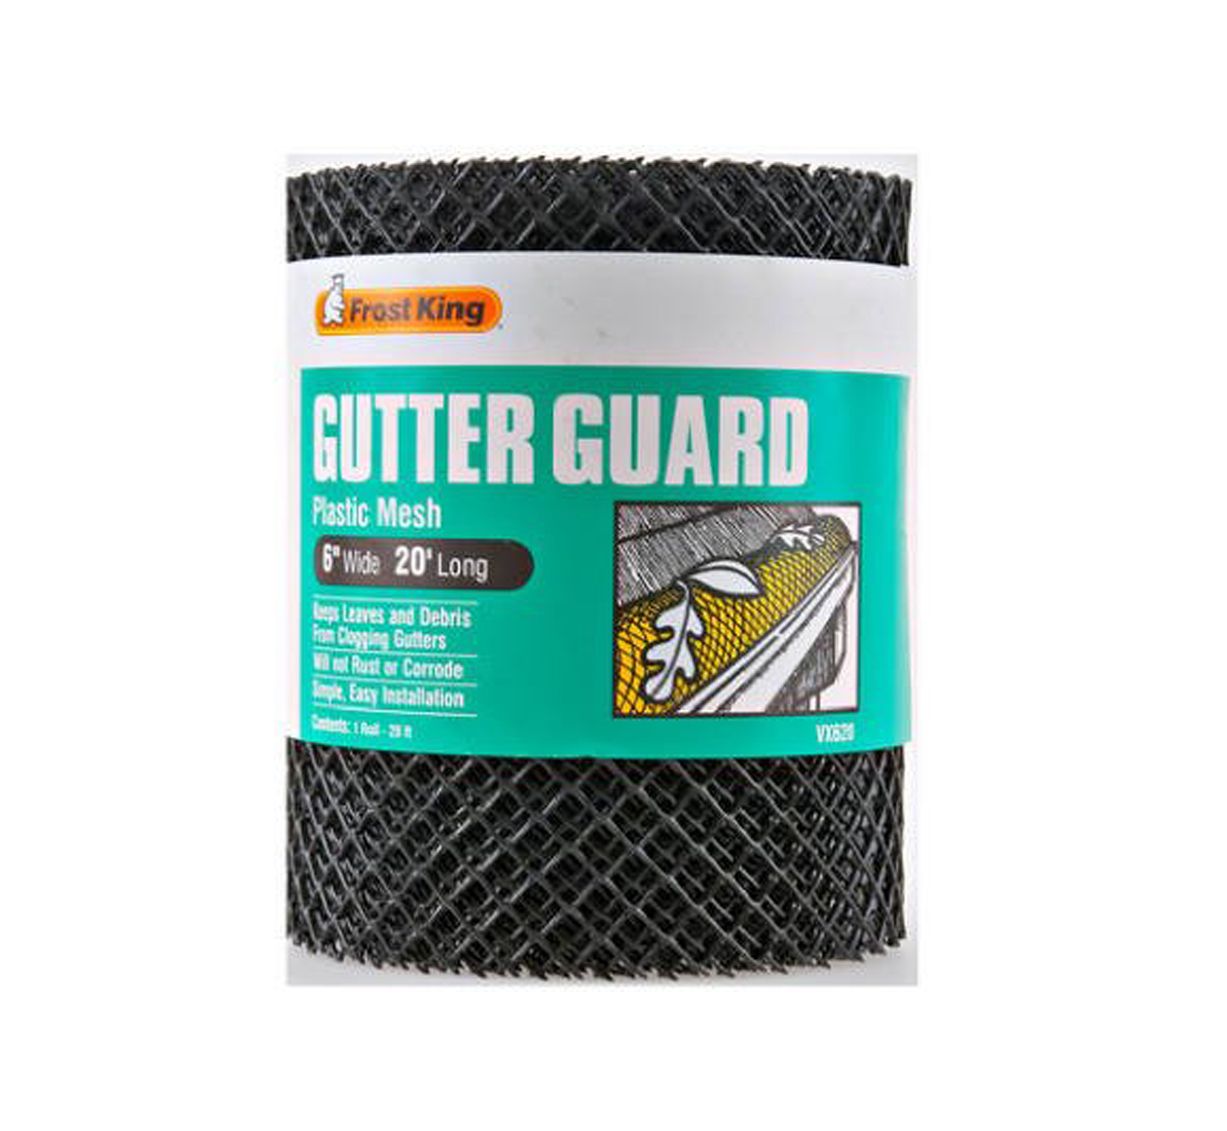 How To Install Frost King Gutter Guard Thermwell Frost King Gutter Guard, 6" X 20'| EquipSupply